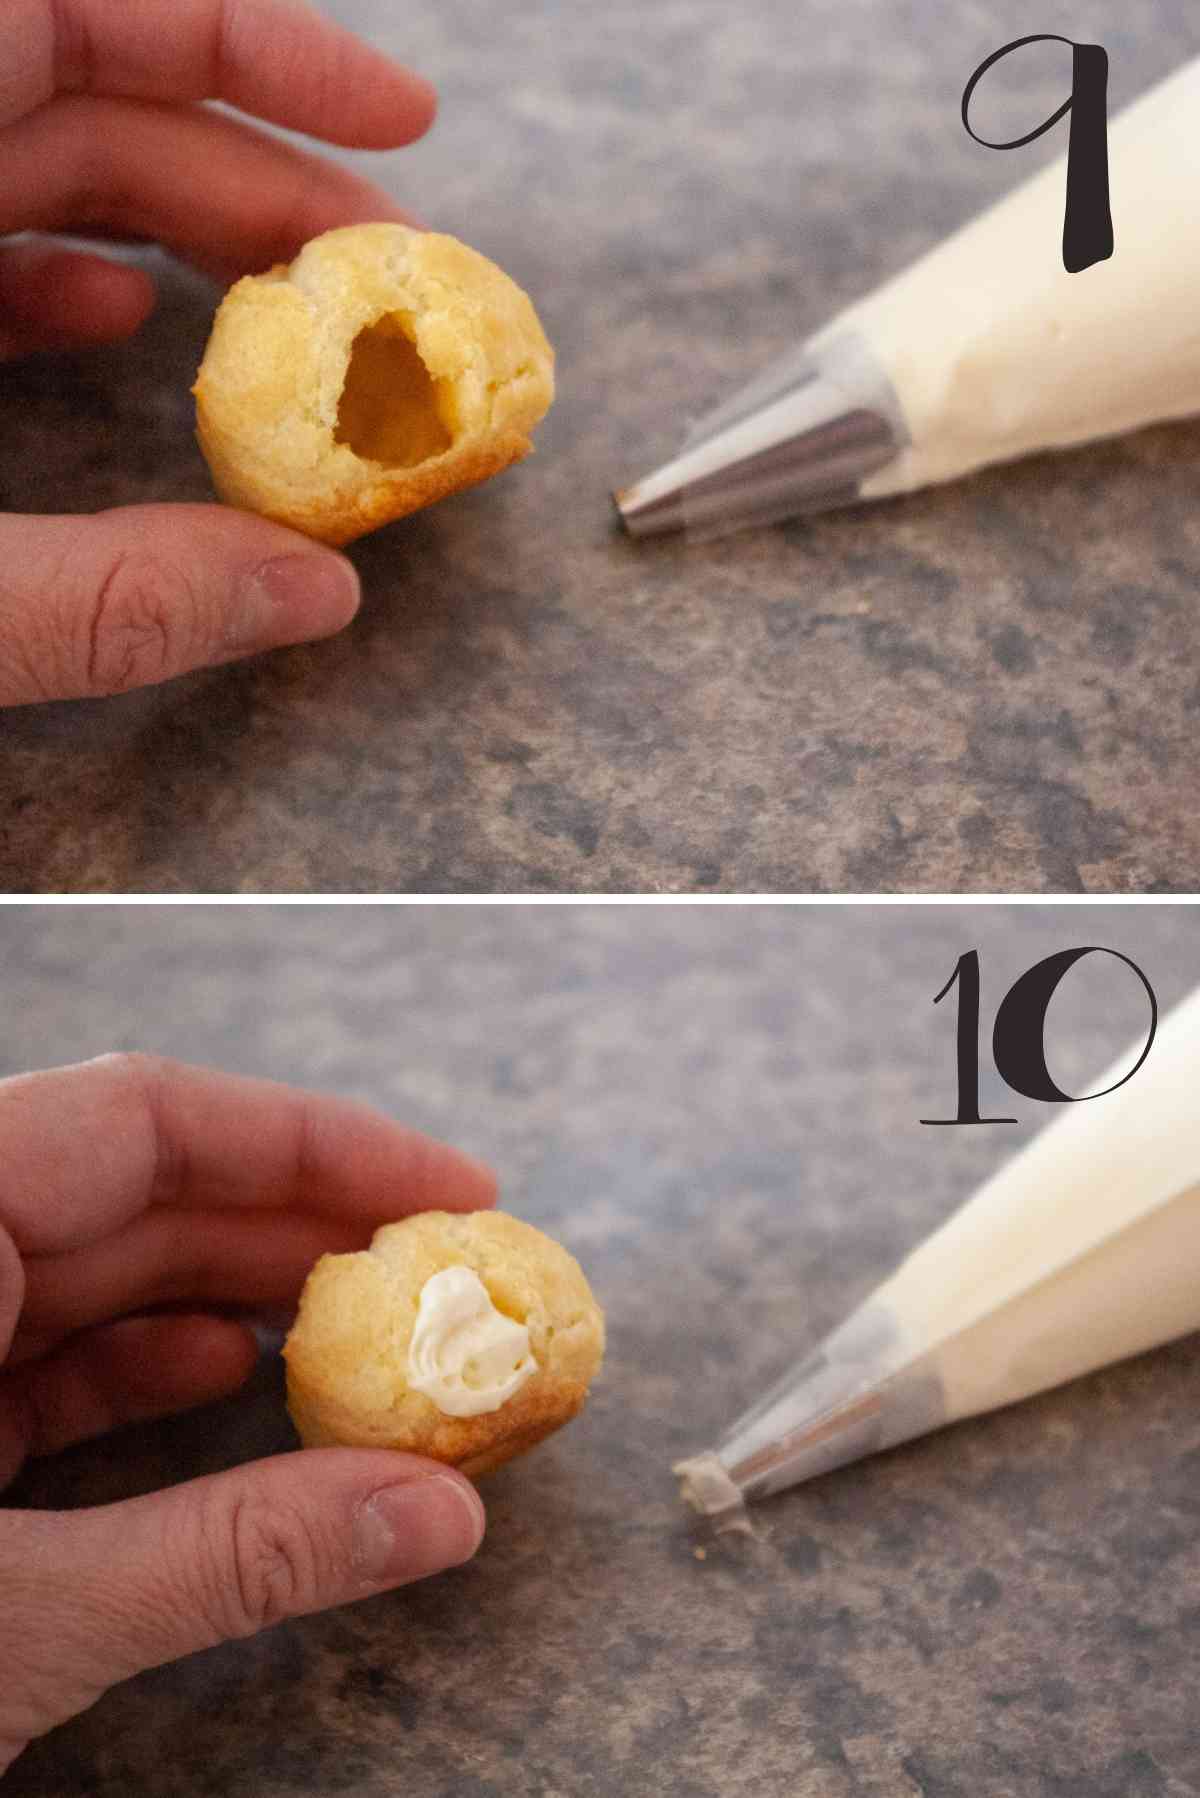 A small hole poked in the side of a baked cream puff and then filled with cream puff filling.